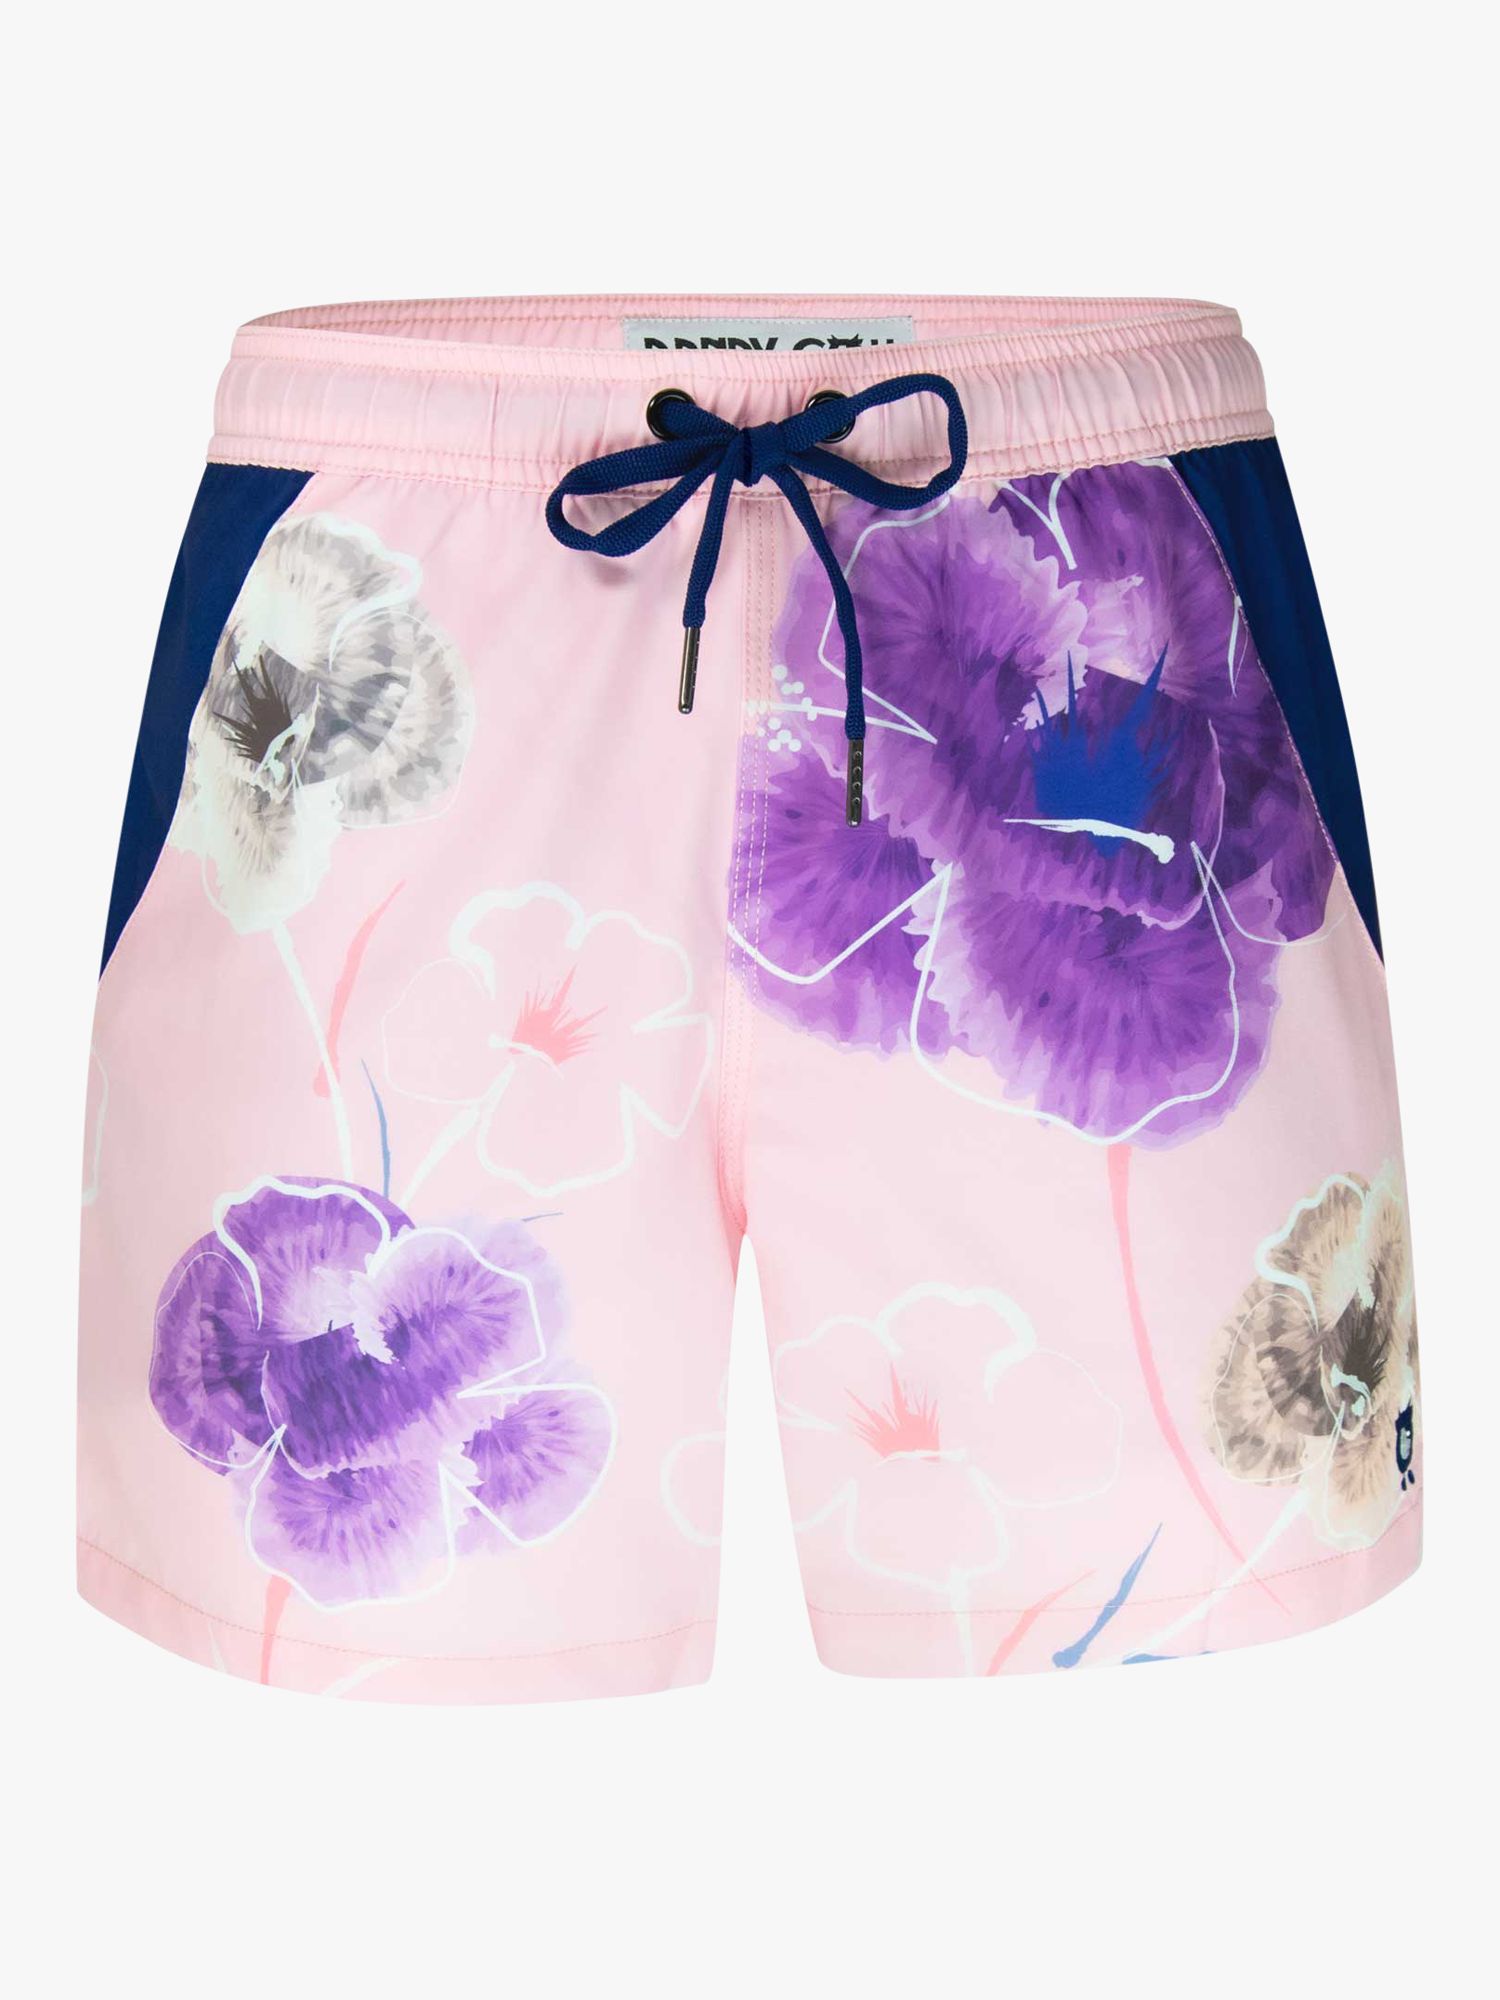 Randy Cow Floral Print Swim Shorts with Waterproof Pocket, Pink/Multi, XS